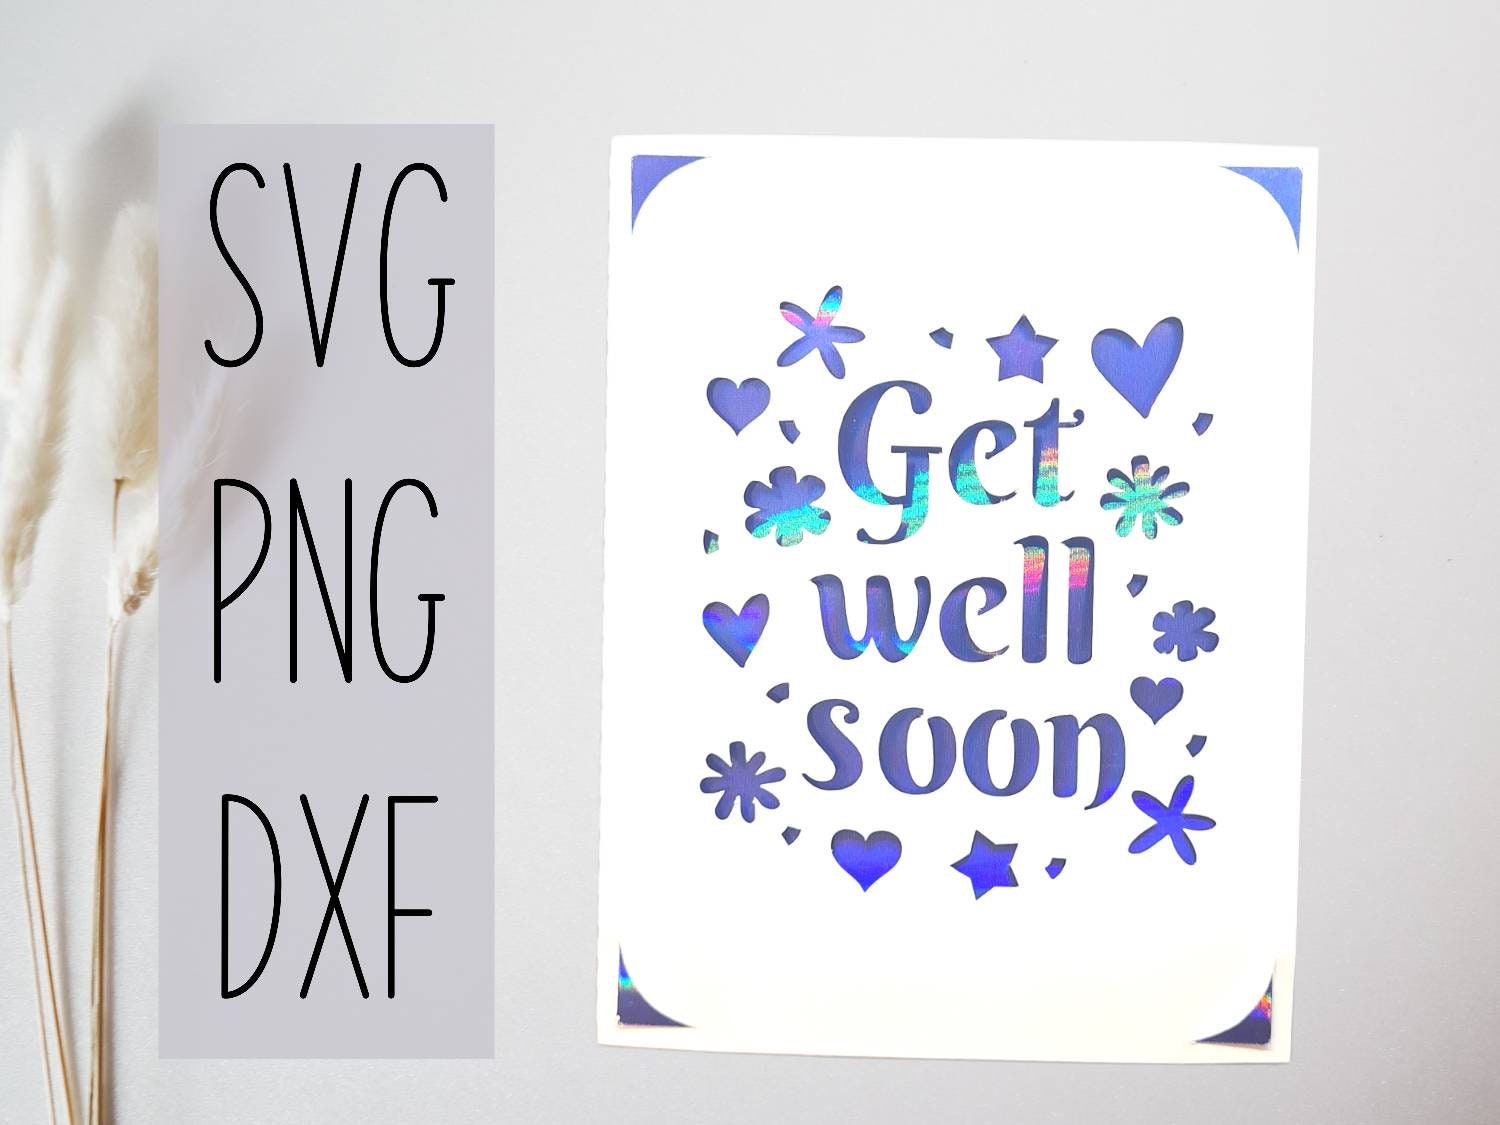 Benny & Belinda Get Well Soon SVG Cutting Files + Clipart - $2.93